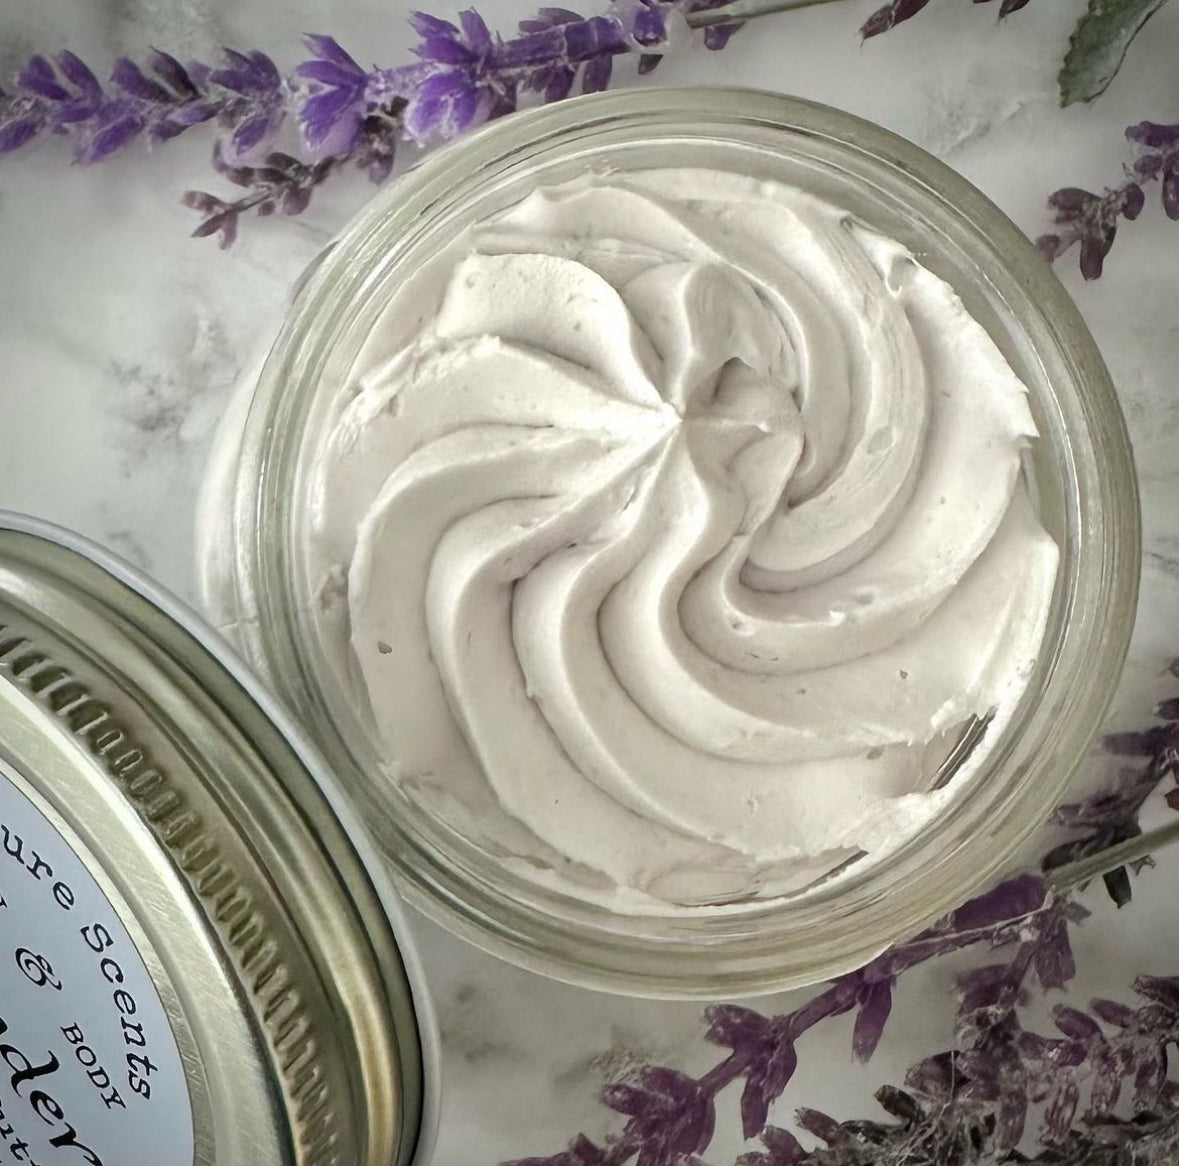 Lavender Whipped Body Butter